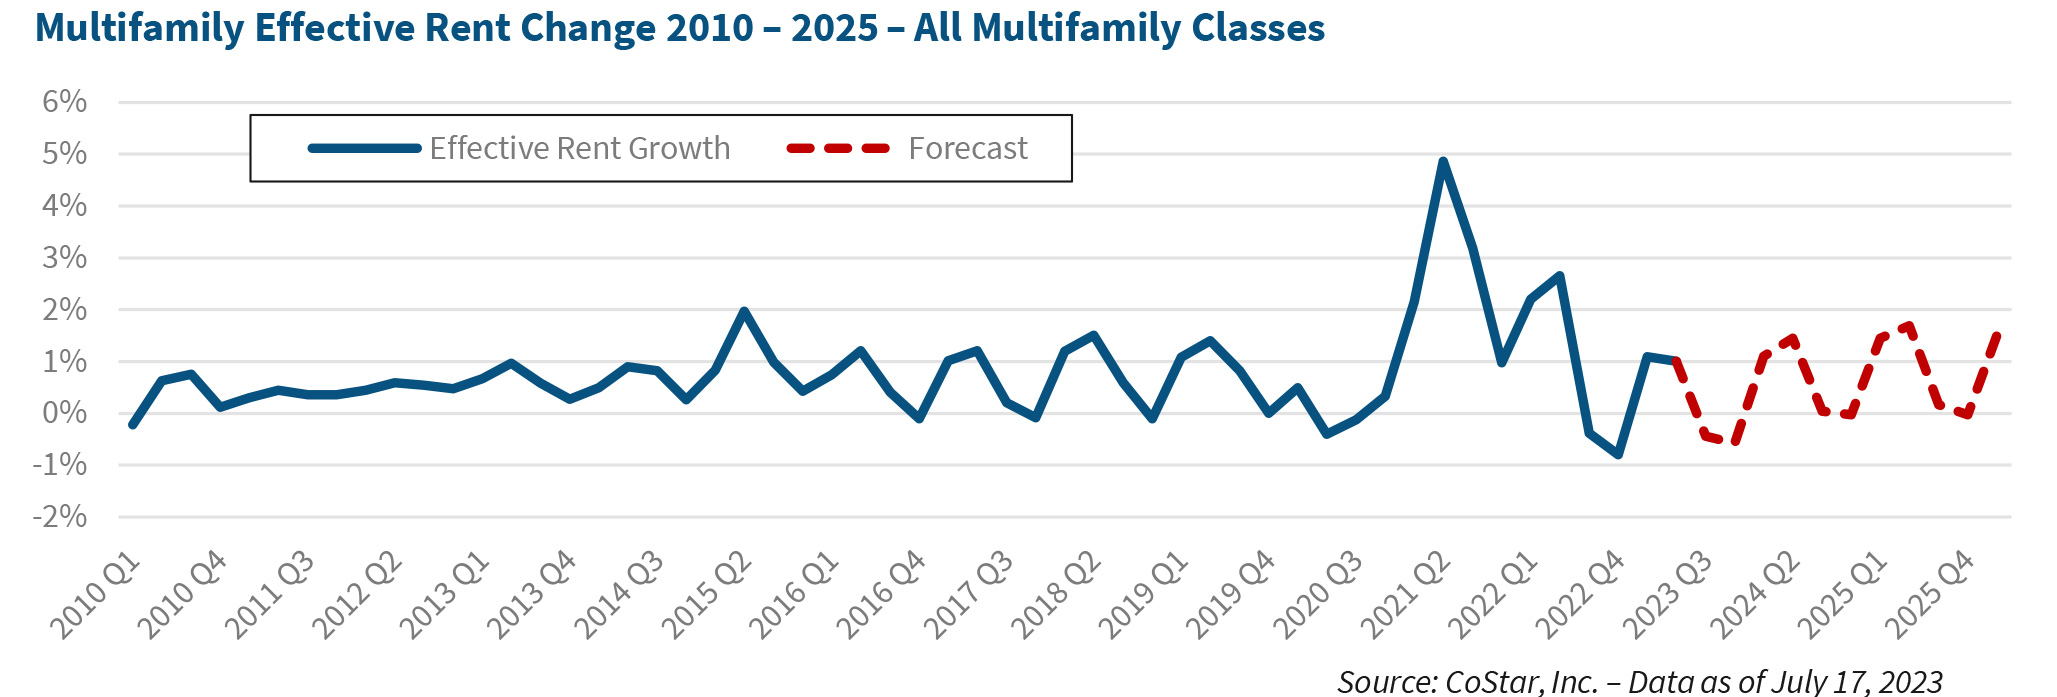 Multifamily Effective Rent Change 2010 – 2025 – All Multifamily Classes